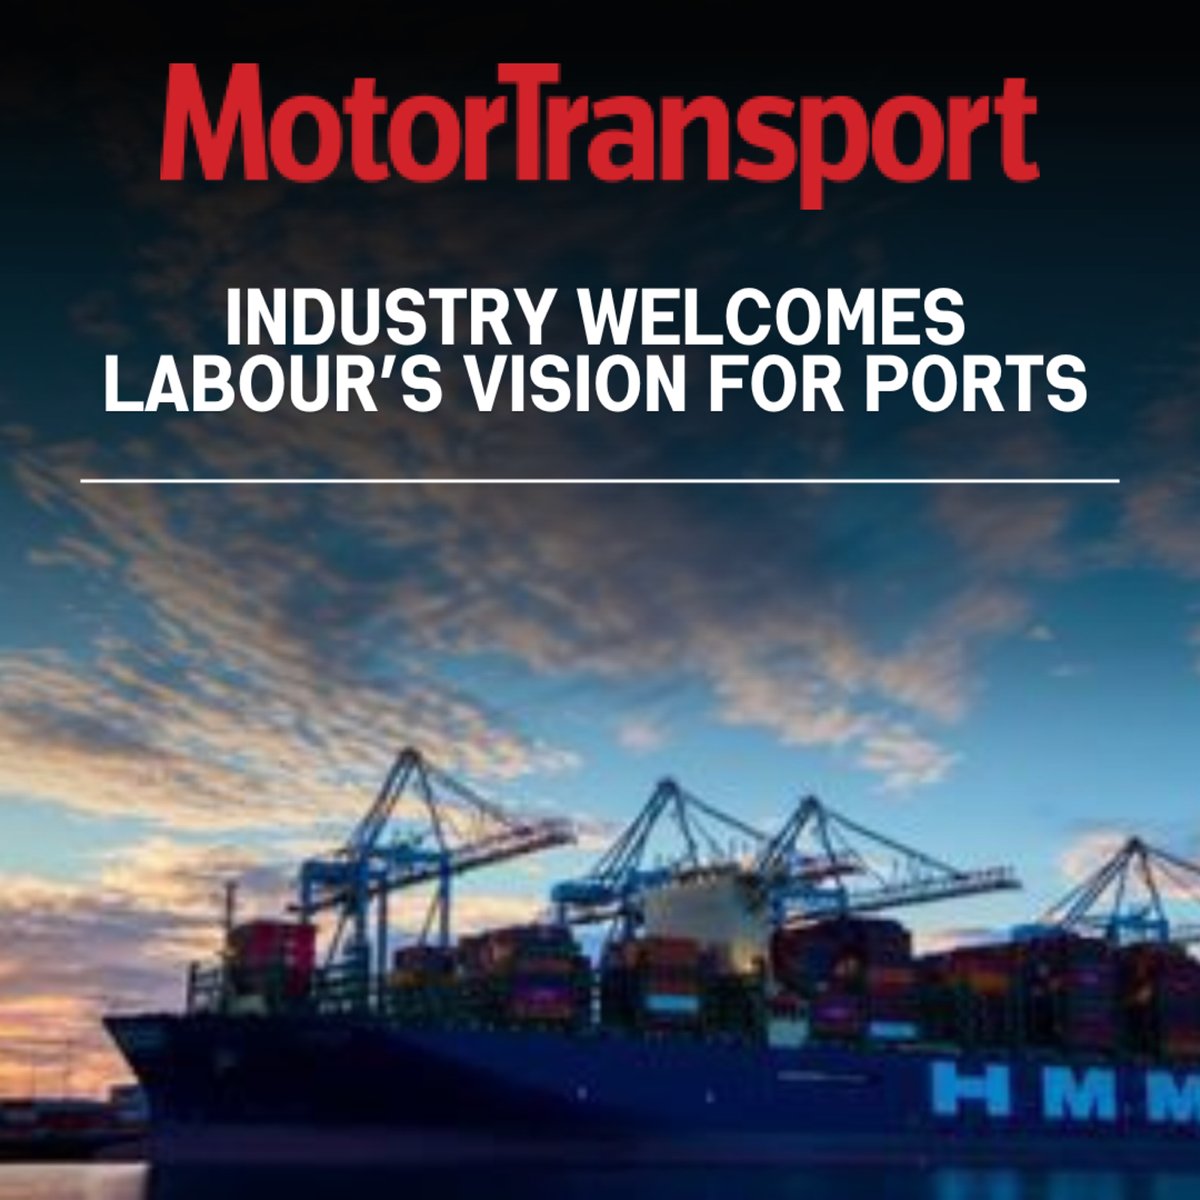 Logistics UK said it looked forward to working with Labour on plans to pump £1.8bn into the nation’s ports and end industrial decline, if the party was successful at the next election. 🔗 bit.ly/4cVCWfs #motortransport